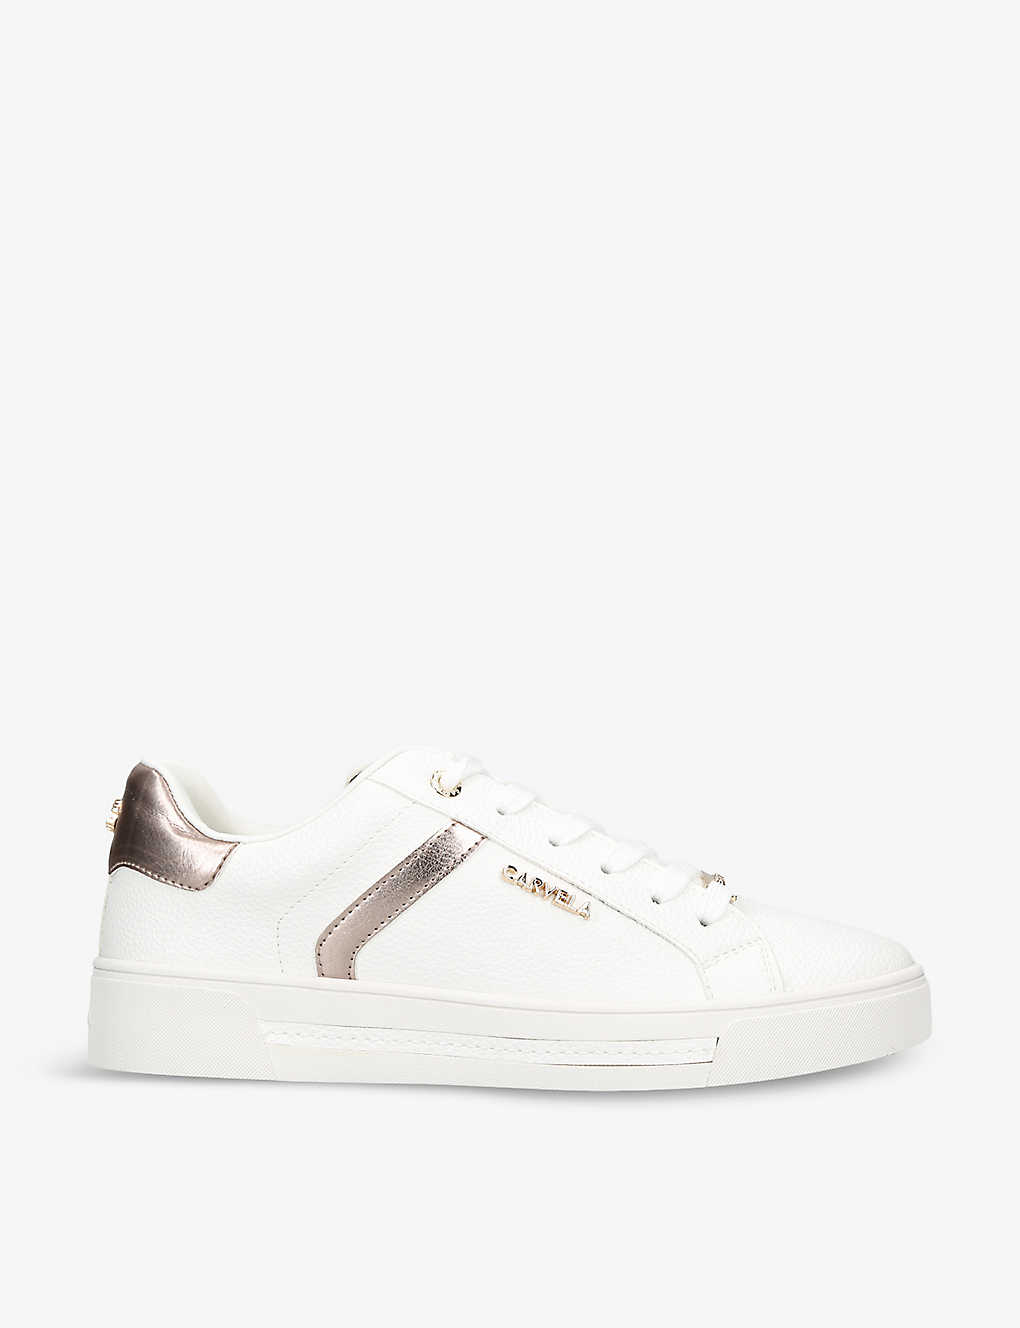 Carvela Daze Faux-leather Low-top Trainers In White/oth